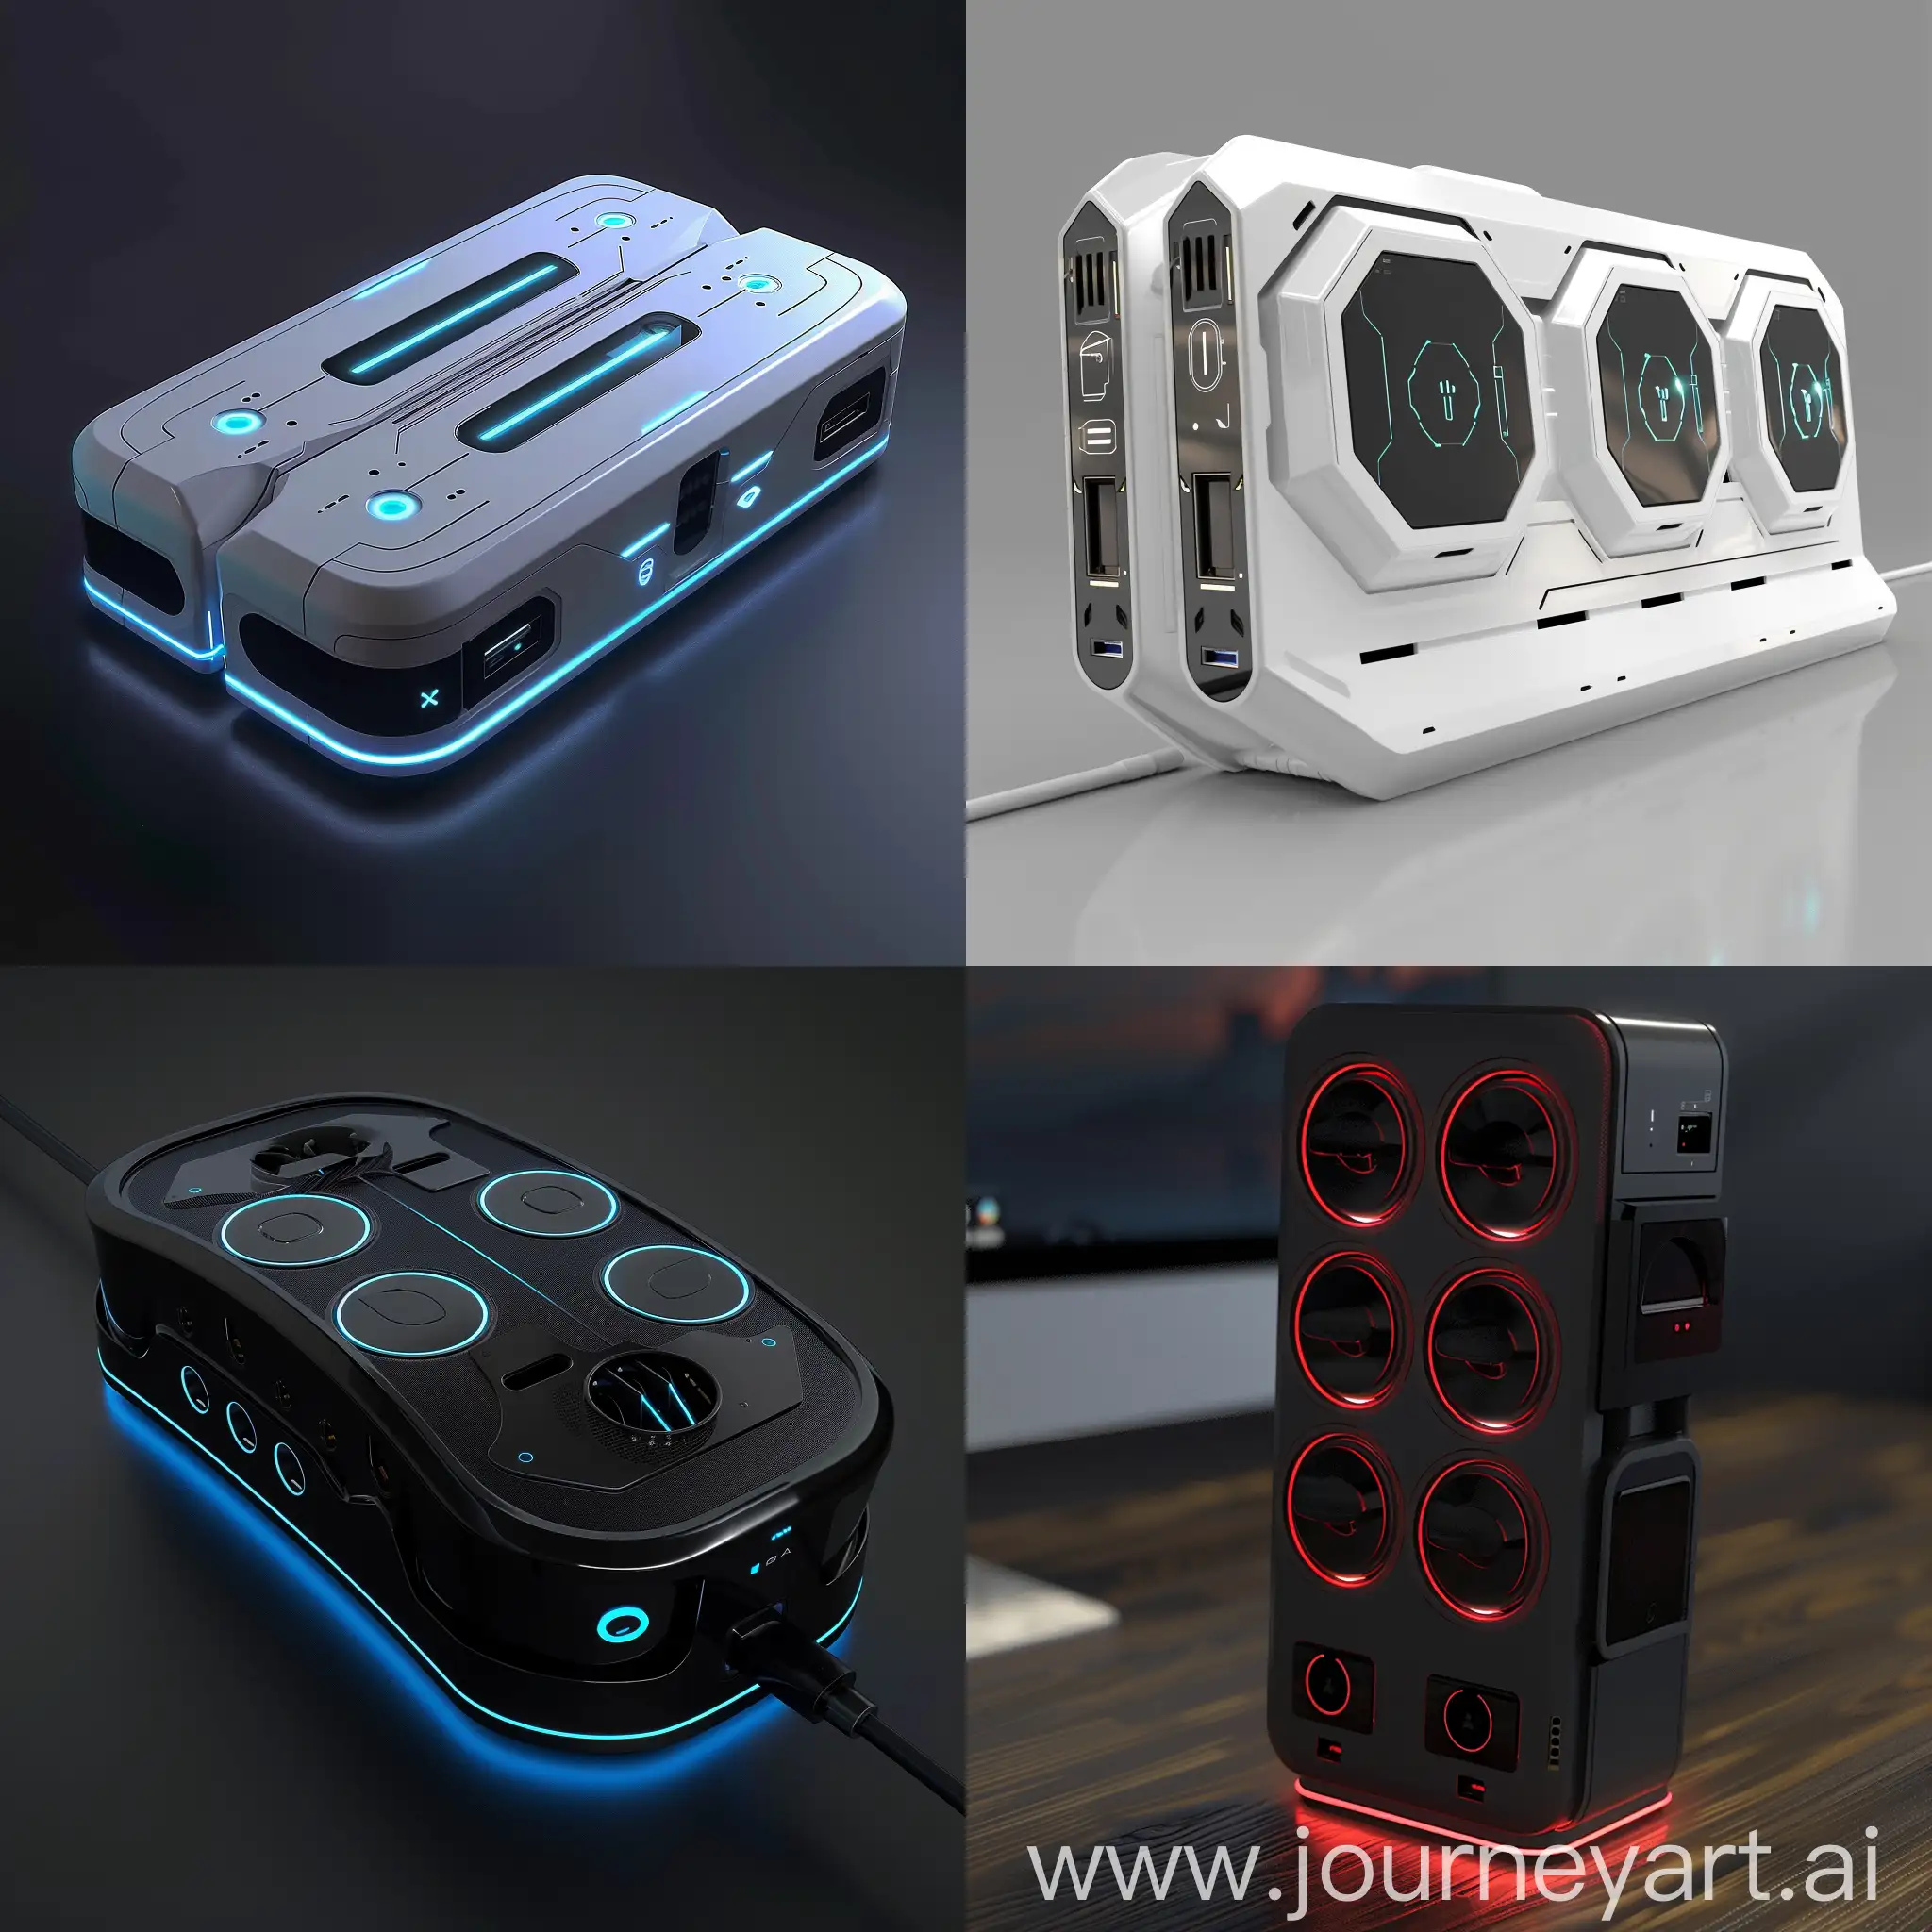 Advanced-SciFi-Multisocket-Adaptor-Modular-Design-with-Smart-Connectivity-and-EcoFriendly-Materials